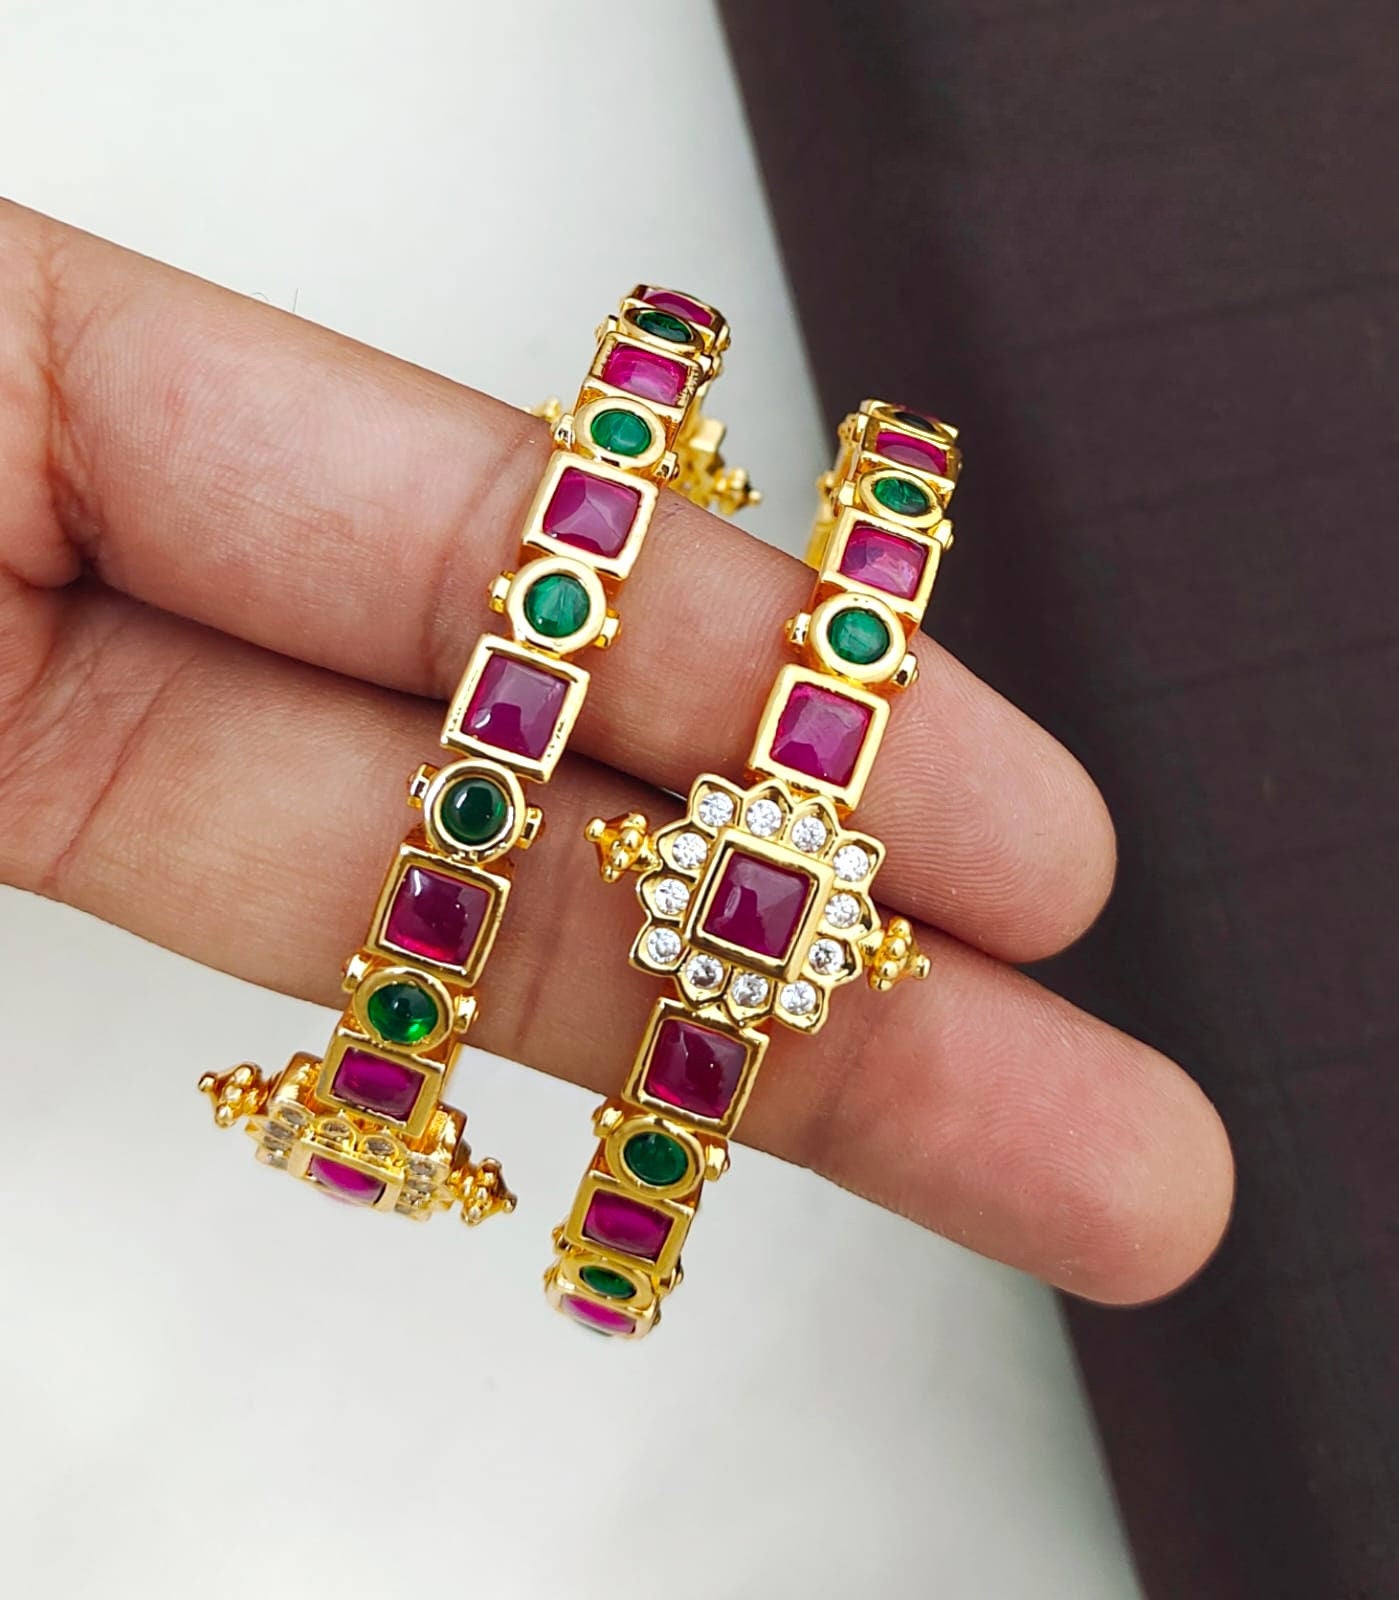 Pair of High quality Gold finish Ruby Green kemp bangles | South Indian Style Traditional jewelry Bangles | Gold bangle bracelet for women